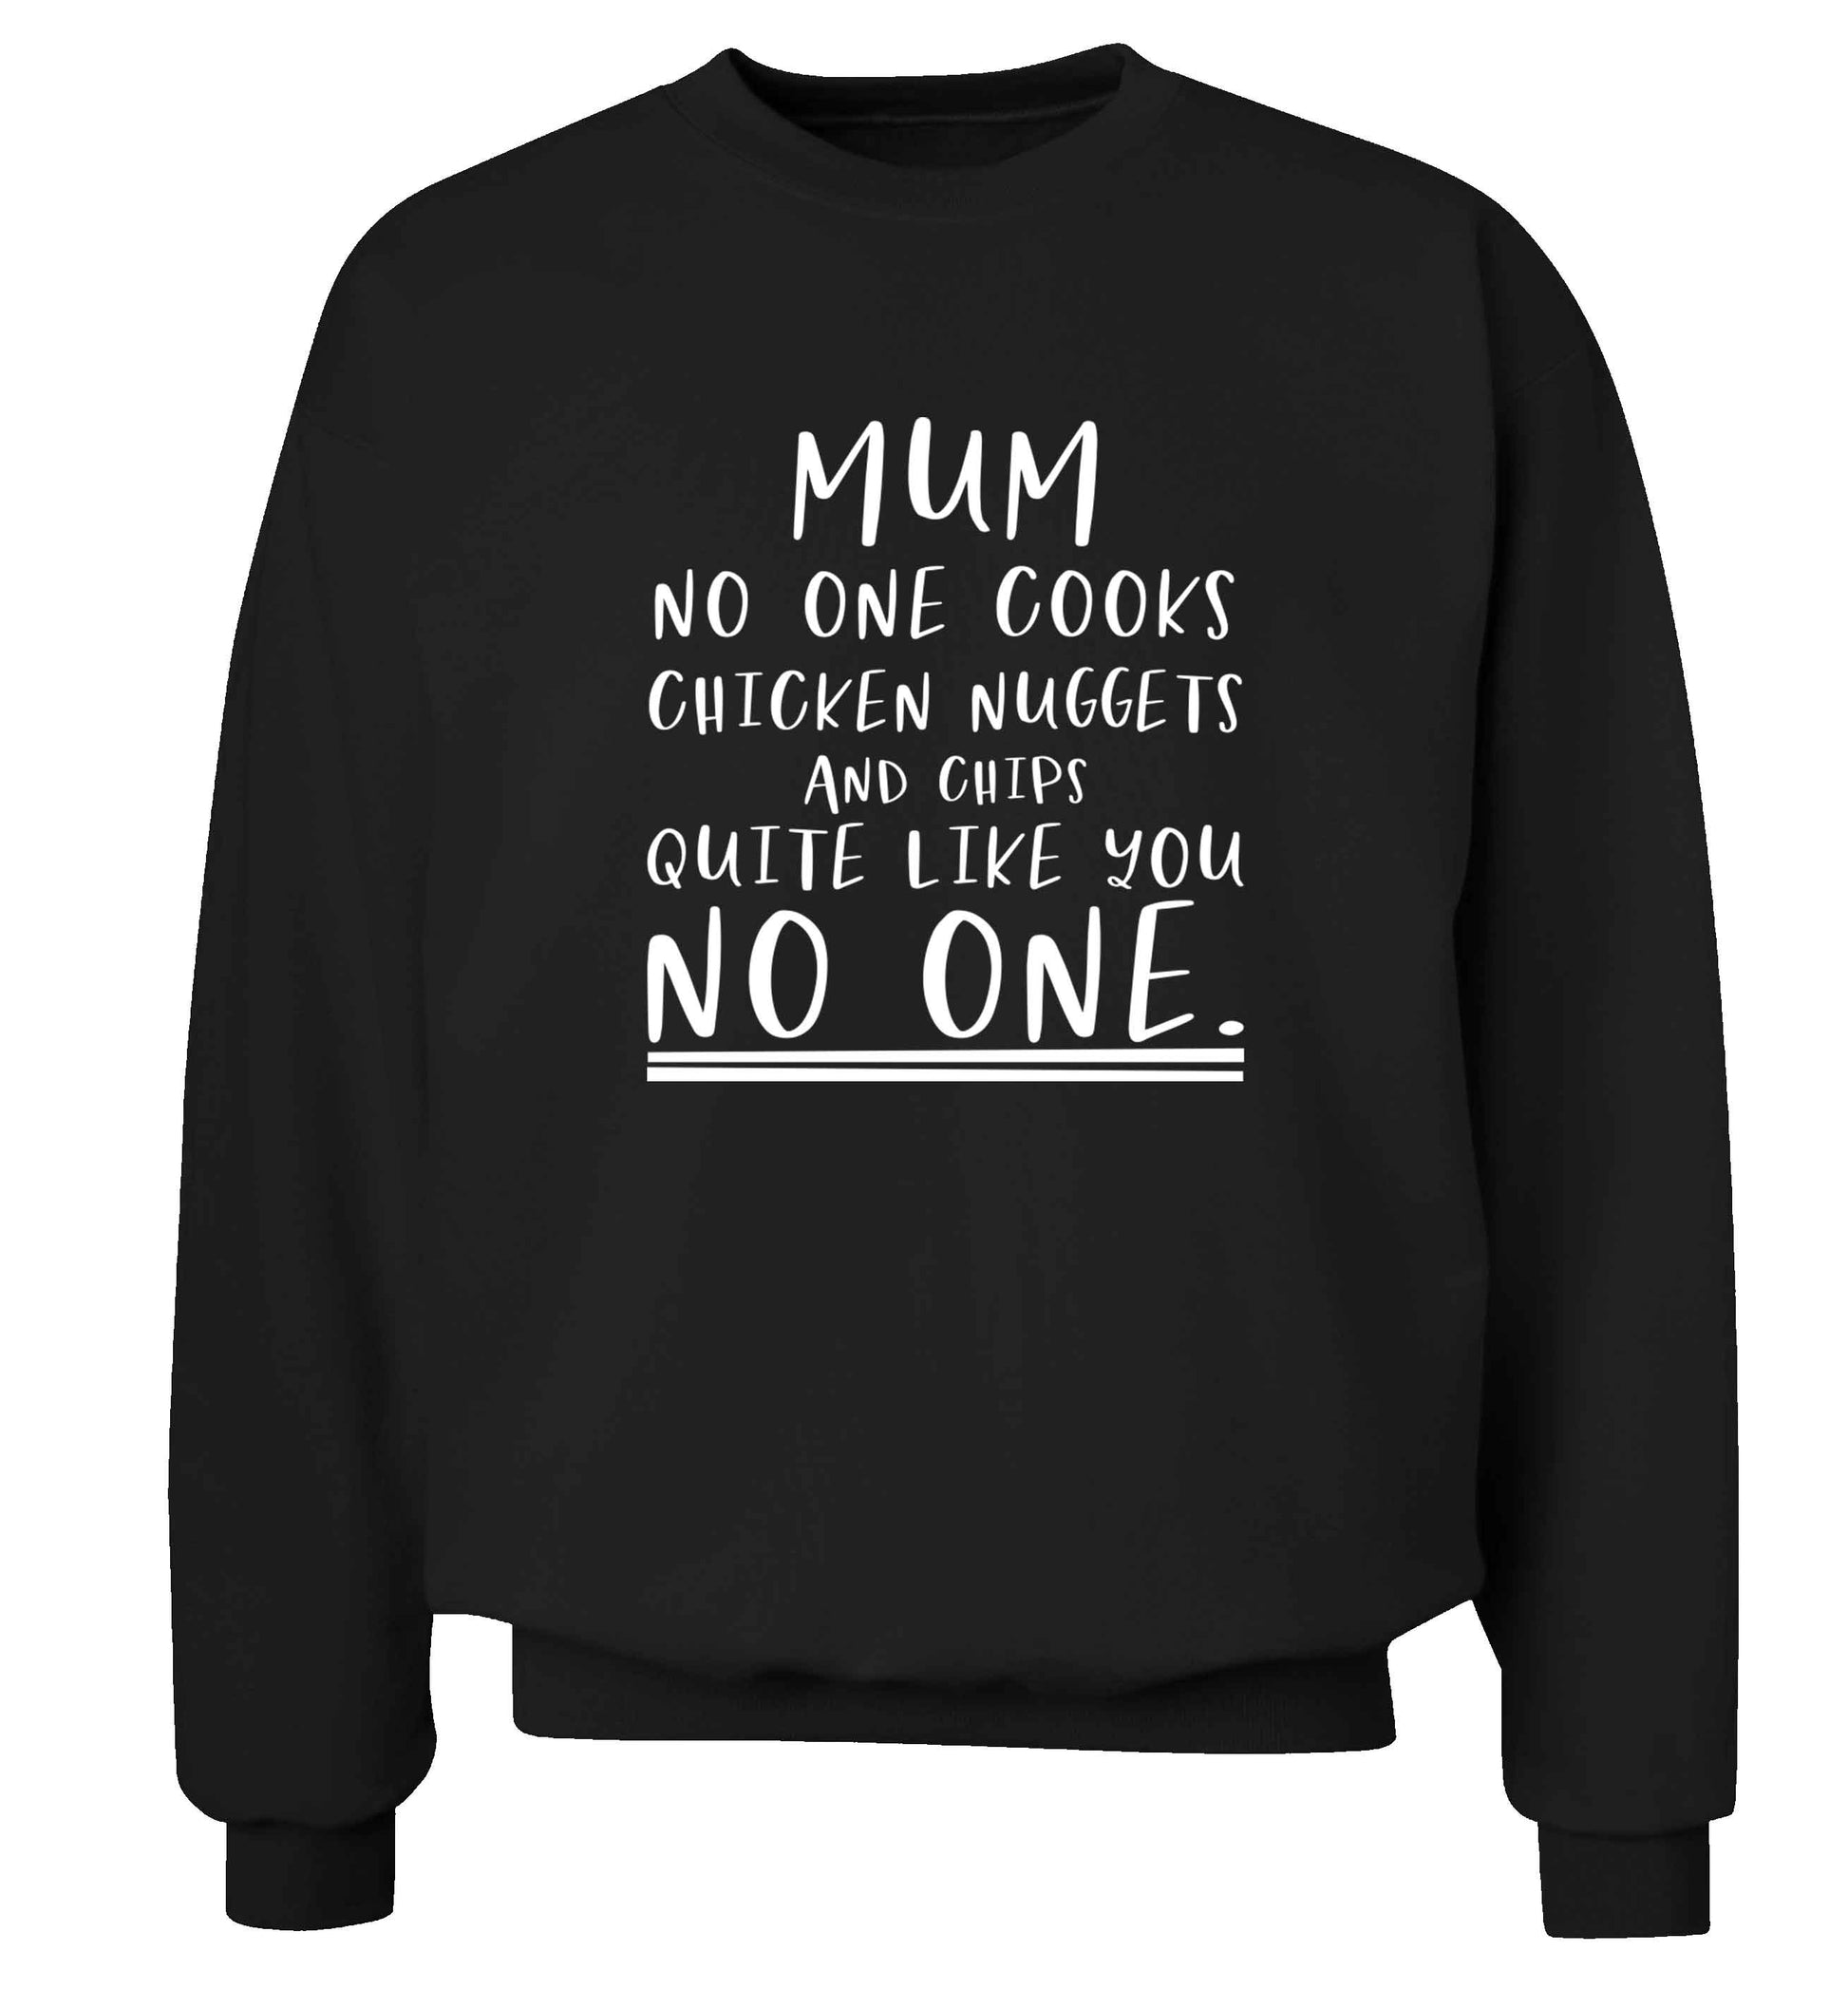 Super funny sassy gift for mother's day or birthday!  Mum no one cooks chicken nuggets and chips like you no one adult's unisex black sweater 2XL